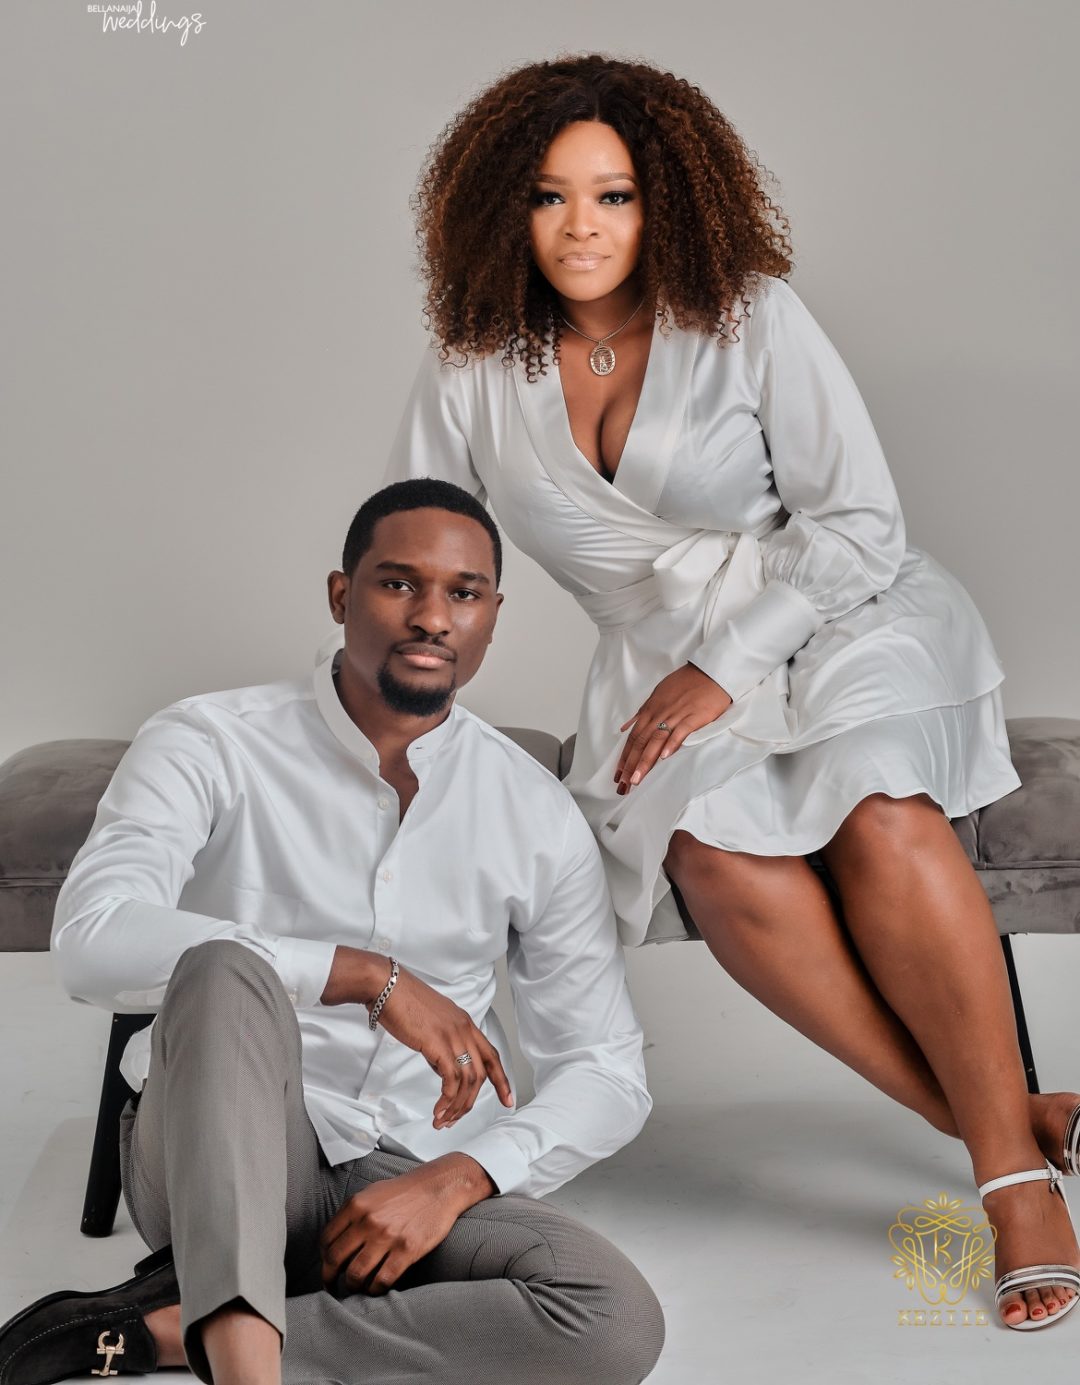 Feyi & Ibukun's Pre-wedding Shoot is The Perfect Start for Today